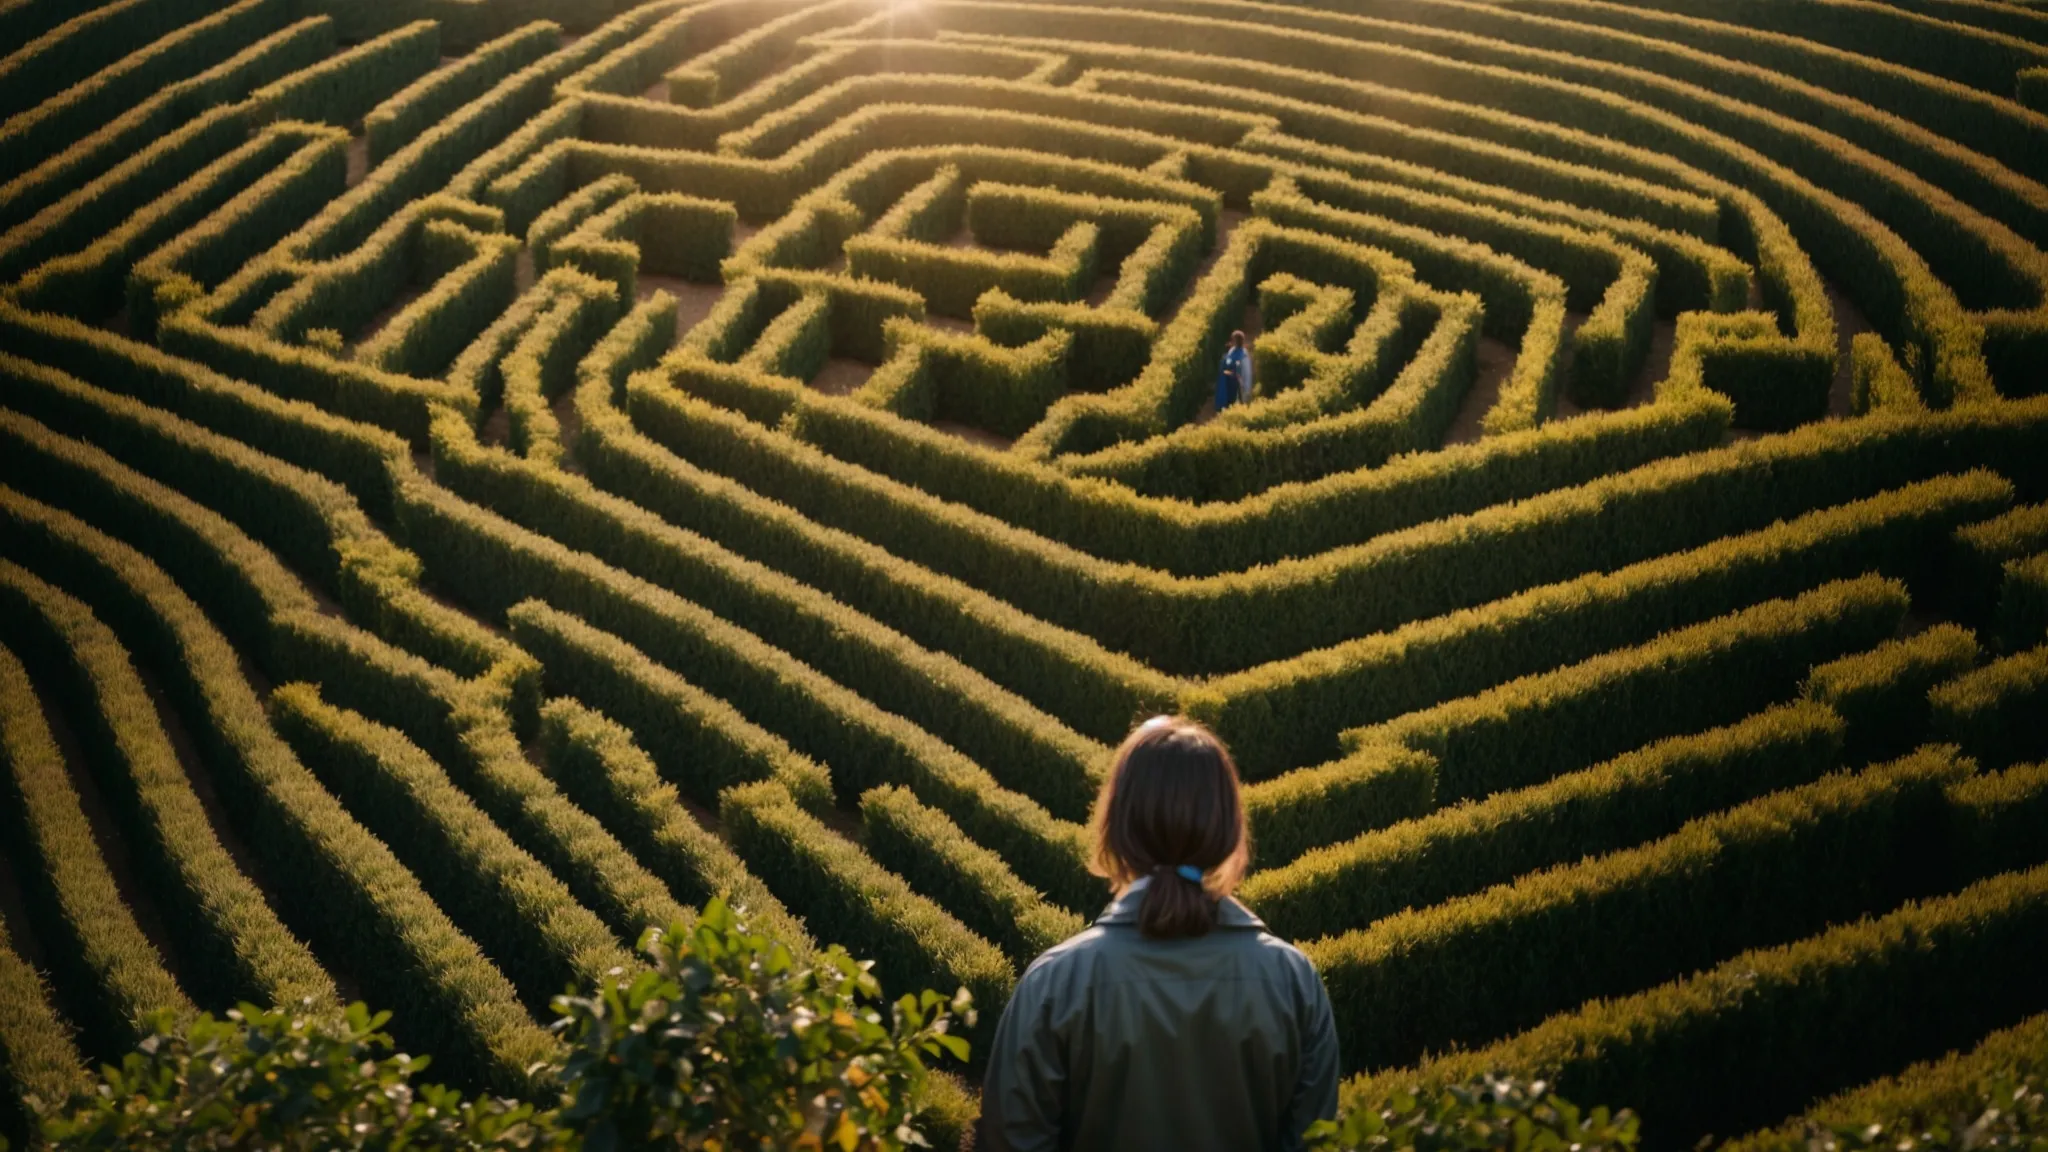 a person stands at the entrance of a maze, looking towards various paths illuminated under the sunlight, with fields ready for sowing visible beyond.